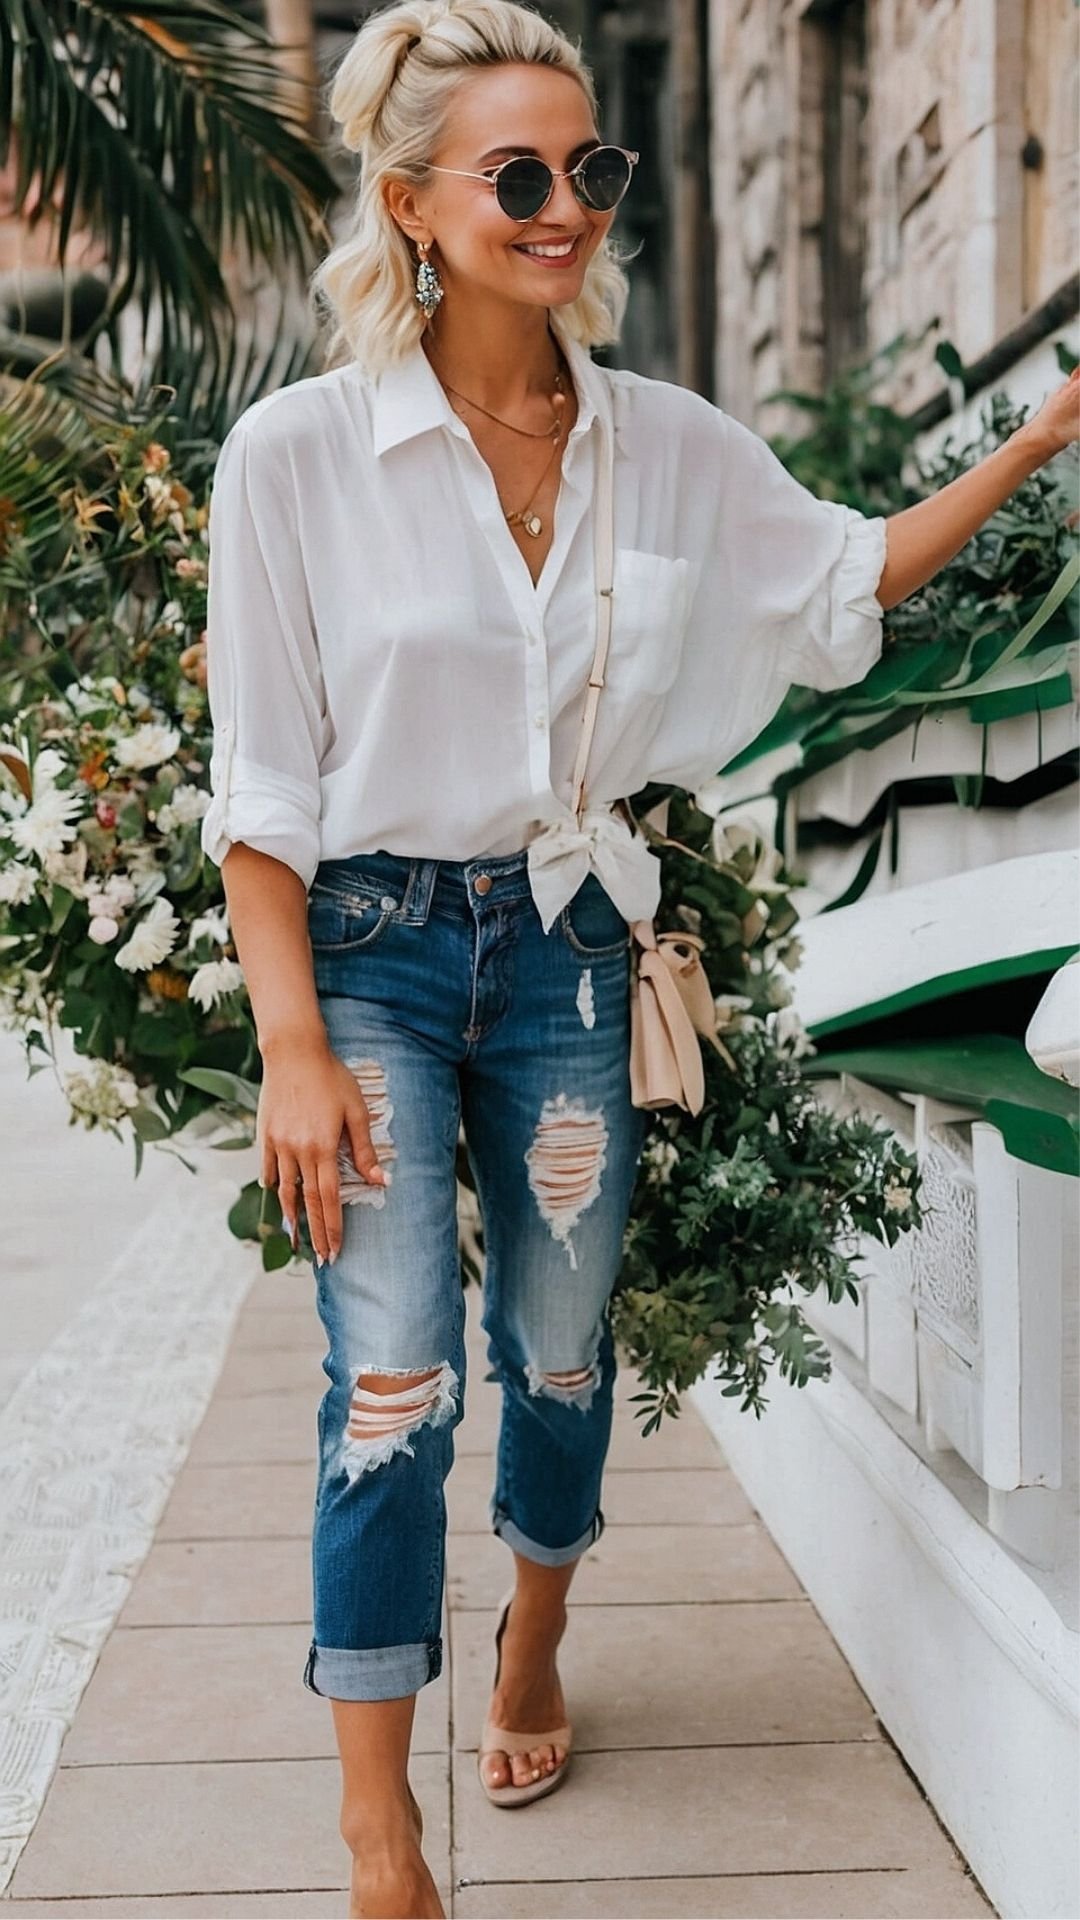 Urban Spring: Classic White Shirt & Ripped Jeans Combo